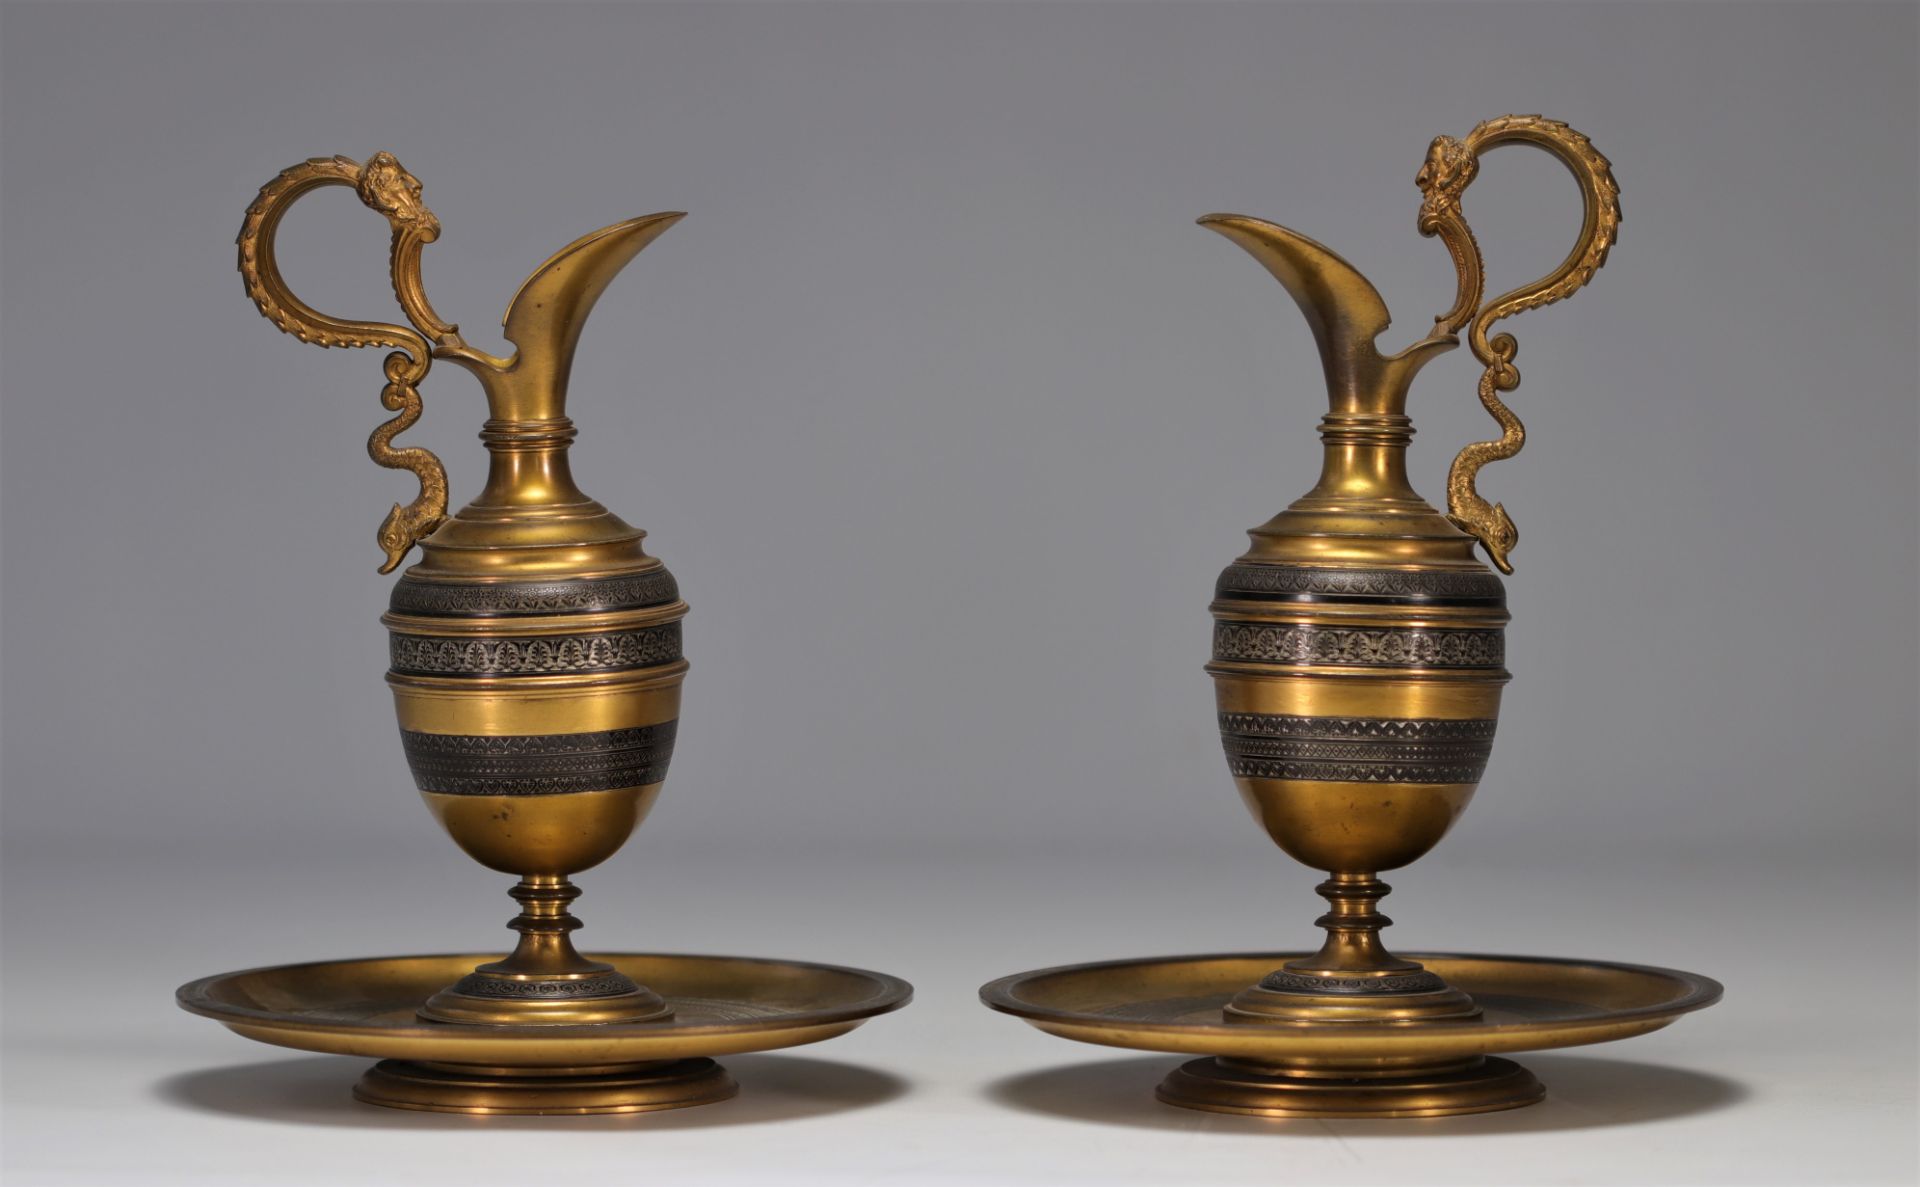 Pair of antique bronze pourers with silver inlay